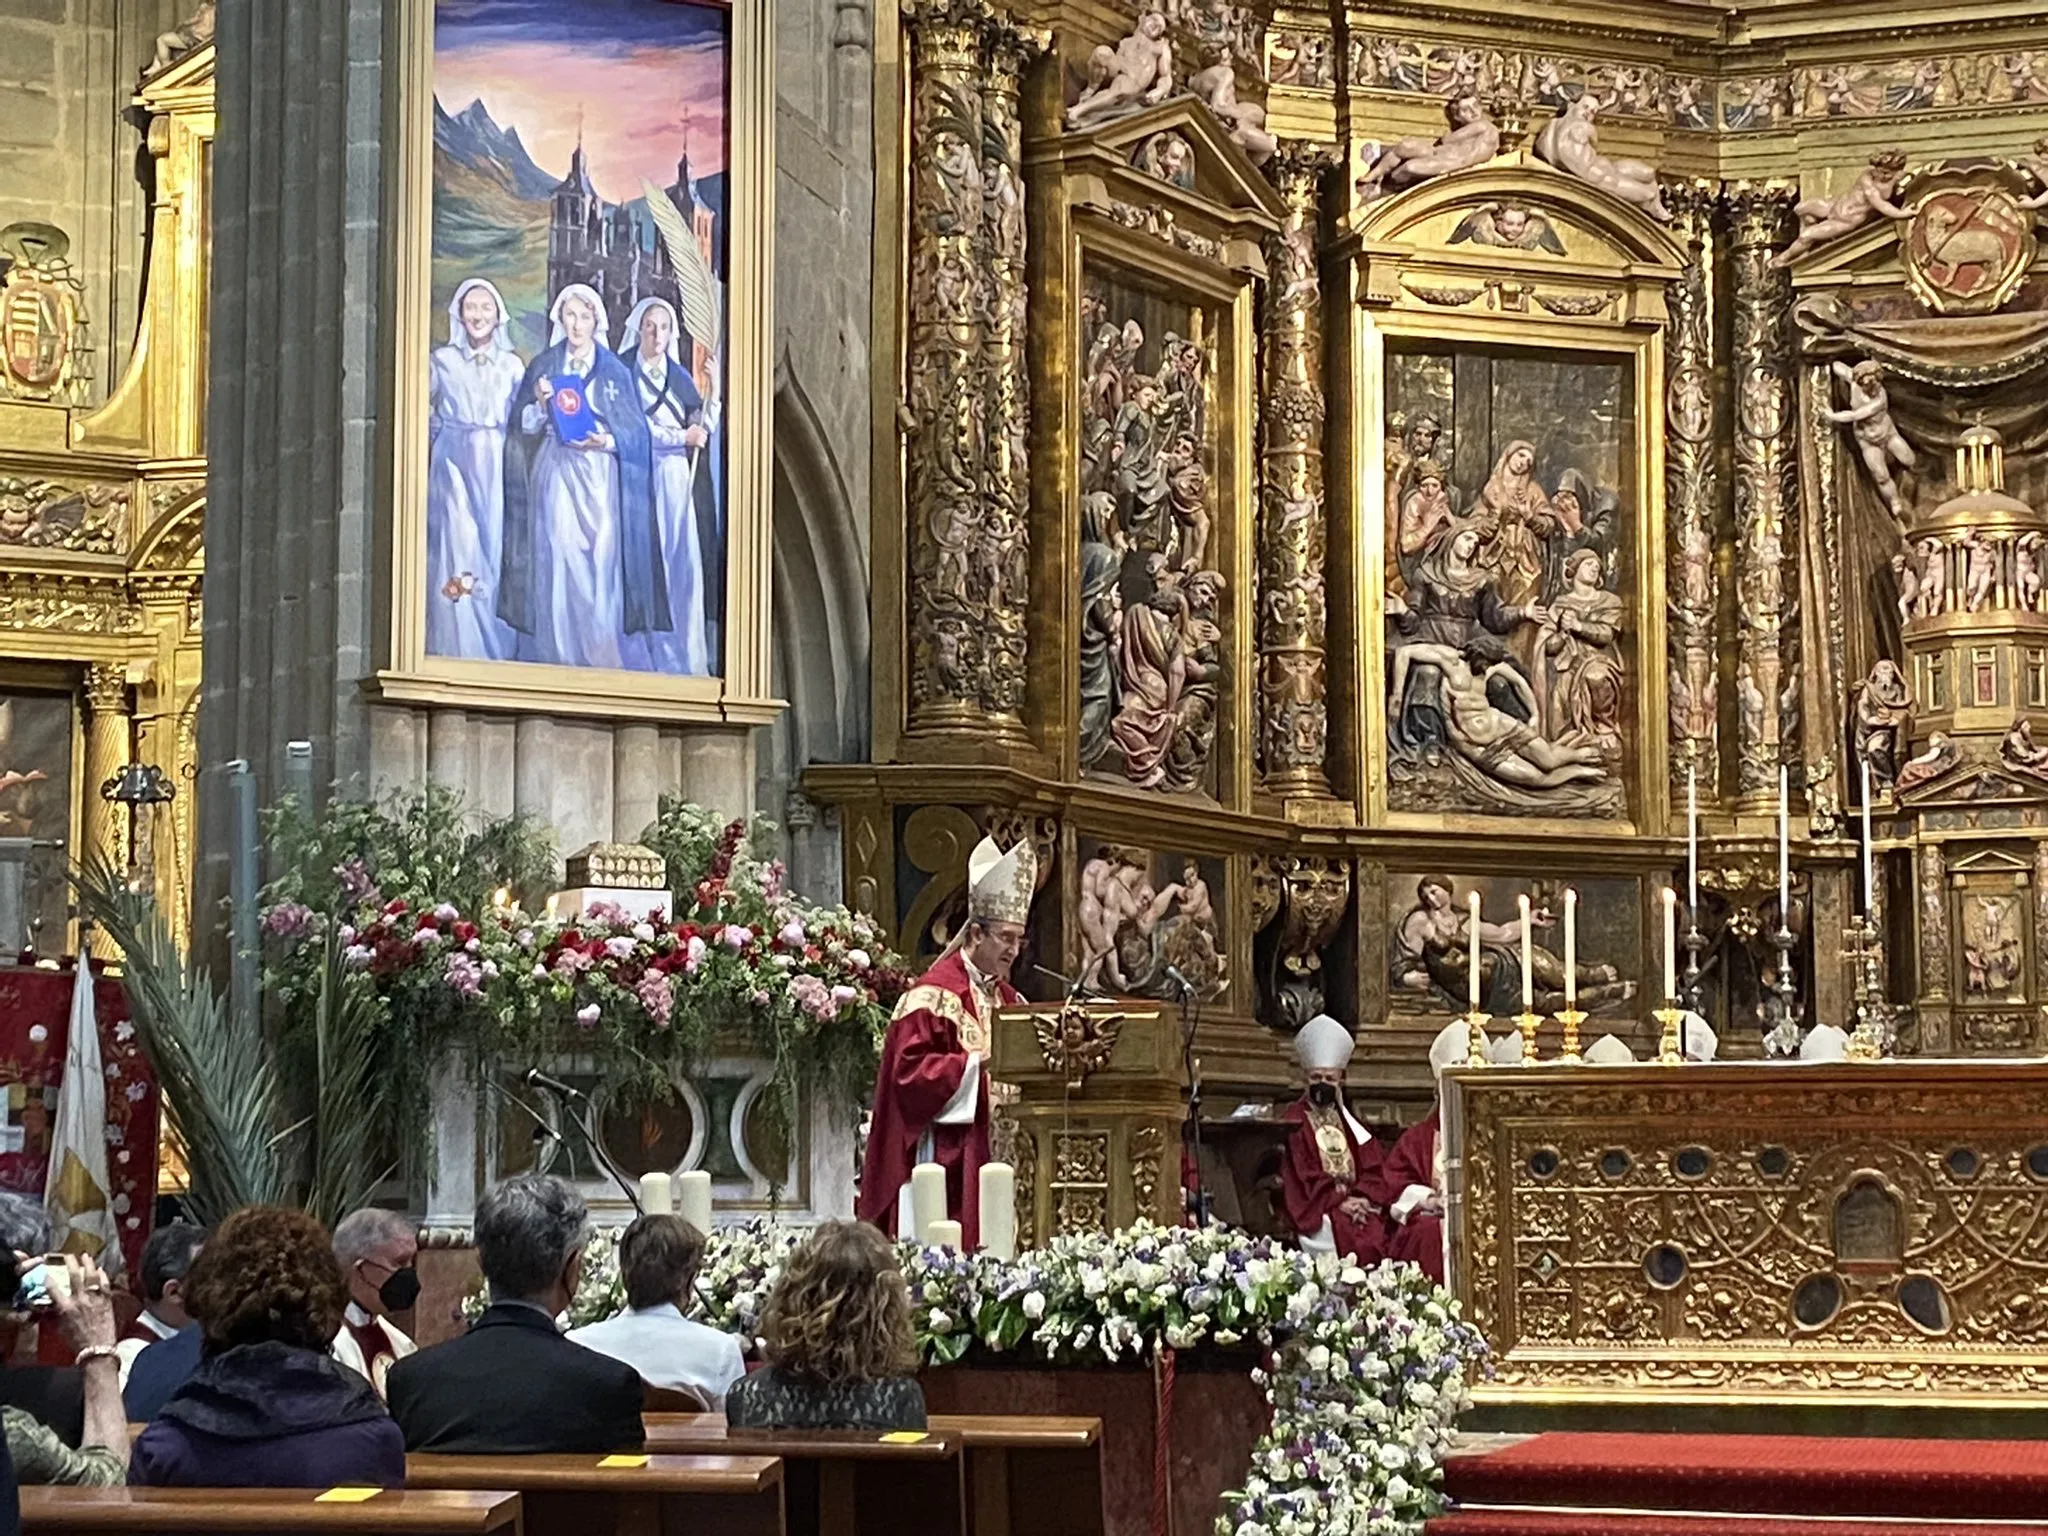 The Mass of Beatification for Maria Pilar Gullón Yturriaga and two companions at Astorga Cathedral, Astorga, Spain, May 29, 2021. Credit: Diocese of Astorga.?w=200&h=150